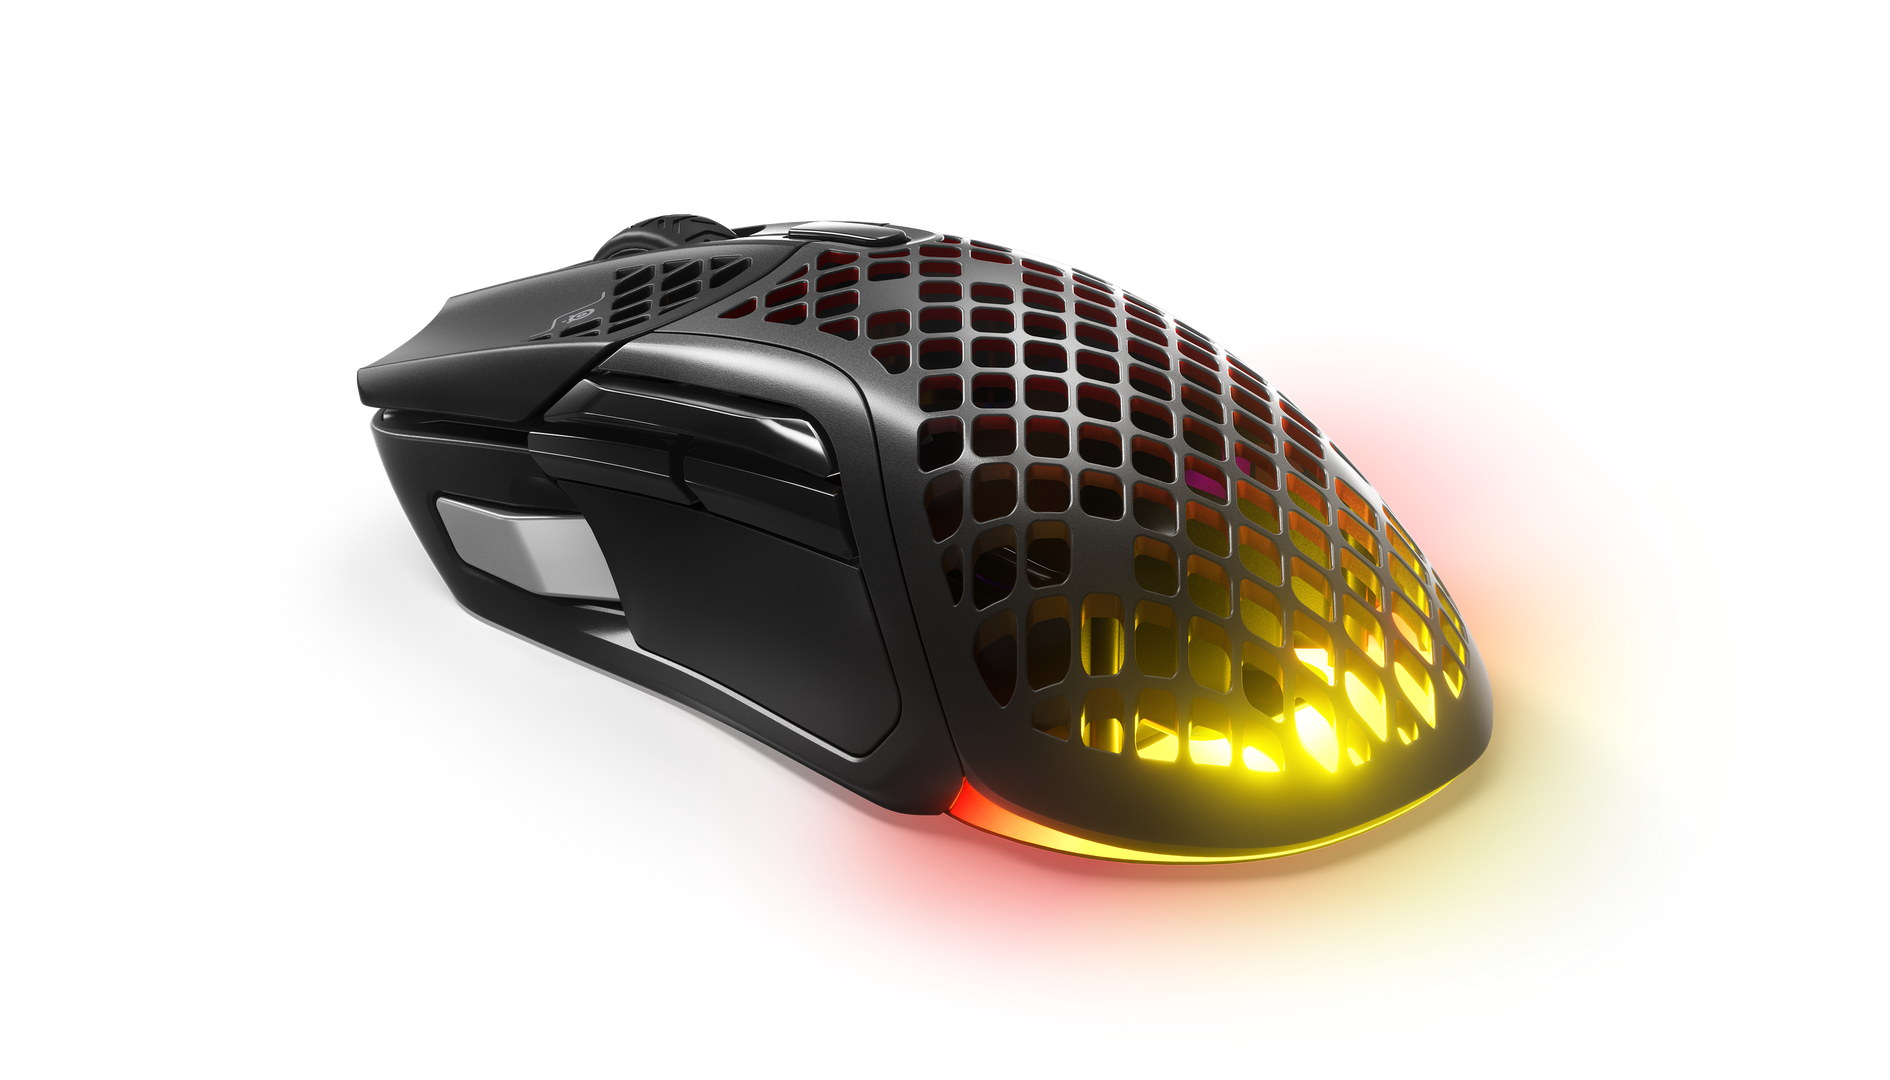 Steelseries - Aerox 5 - Wireless Gaming Mouse